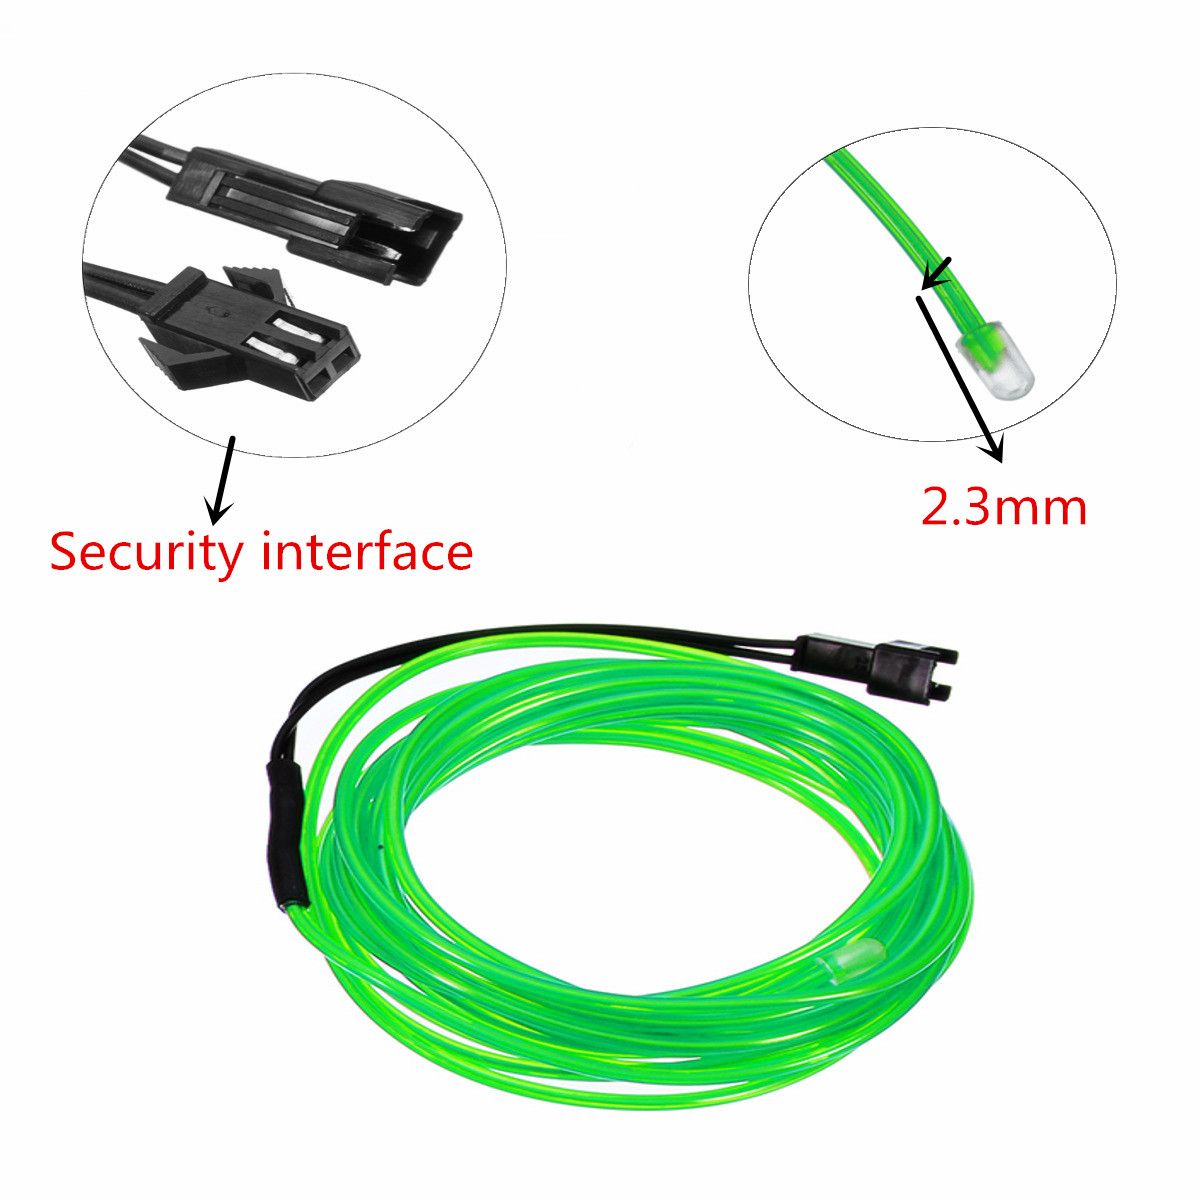 1-5m-Flexible-Neon-Light-Glow-EL-Wire-Rope-Cable-Strip-for-Car-Decor-Party-Clothing-1341825